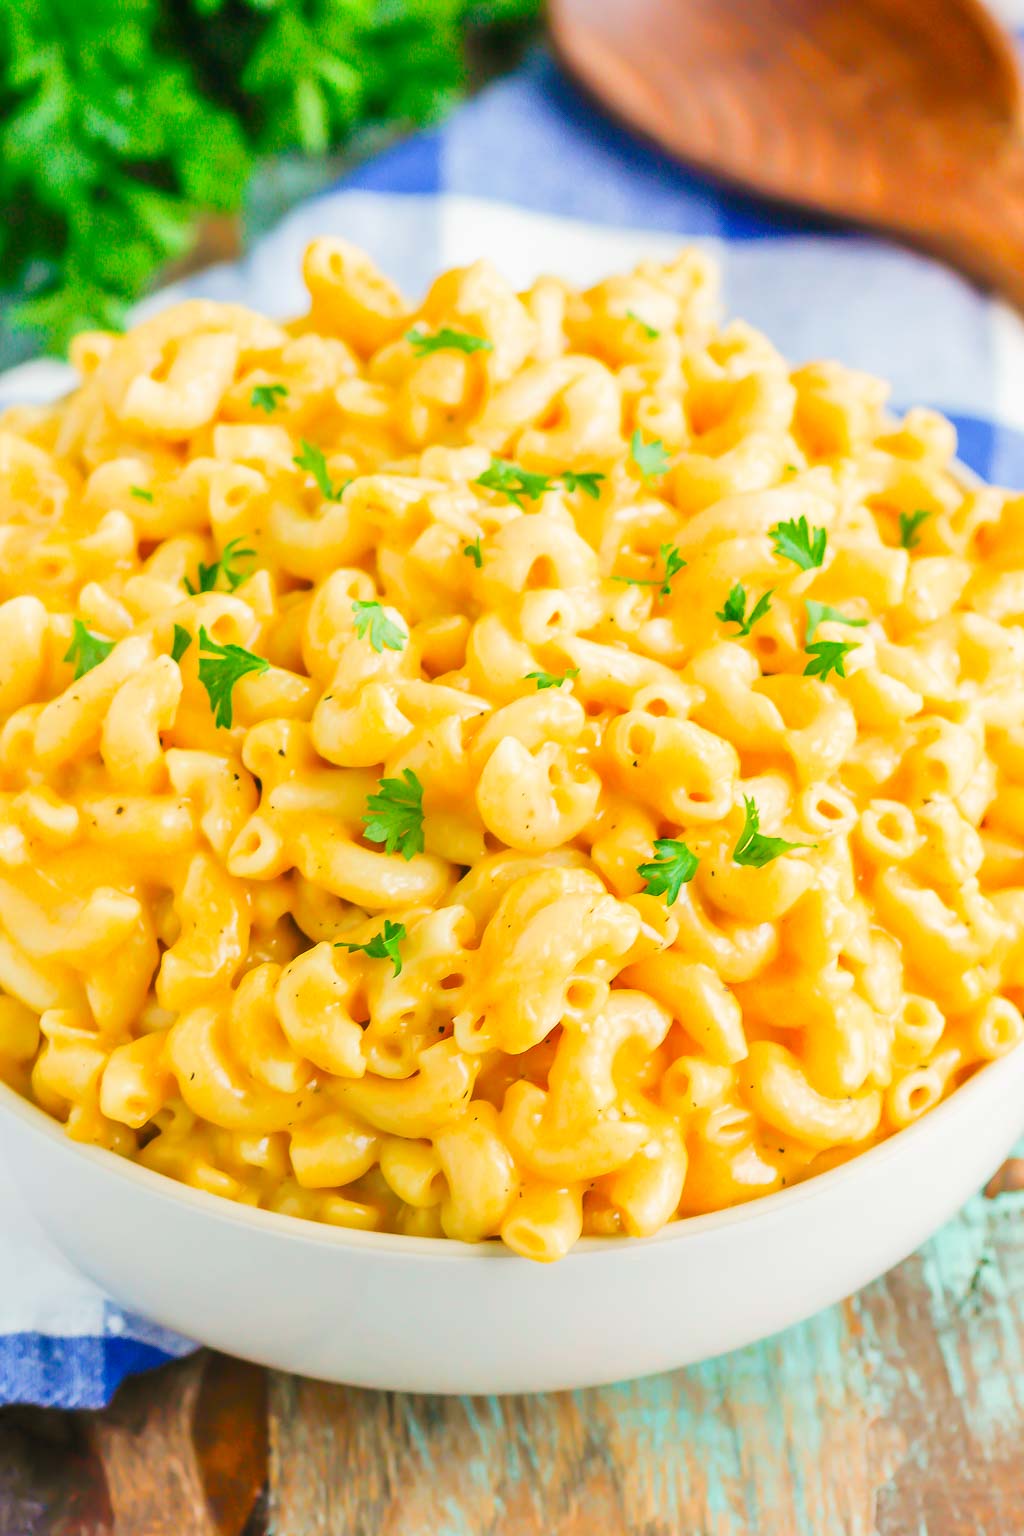 Instant Pot Creamy Macaroni and Cheese is hearty, comforting, and ready in less than 20 minutes. Made with just a few ingredients and ready in no time, it's creamy, cheesy, and so easy to make! #macaroniandcheese #macncheese #instantpotrecipes #instantpotmacaroniandcheese #instantpotmacandcheese #instantpotmacncheese #sidedish #creamymacandcheese #thanksgiving #dinner